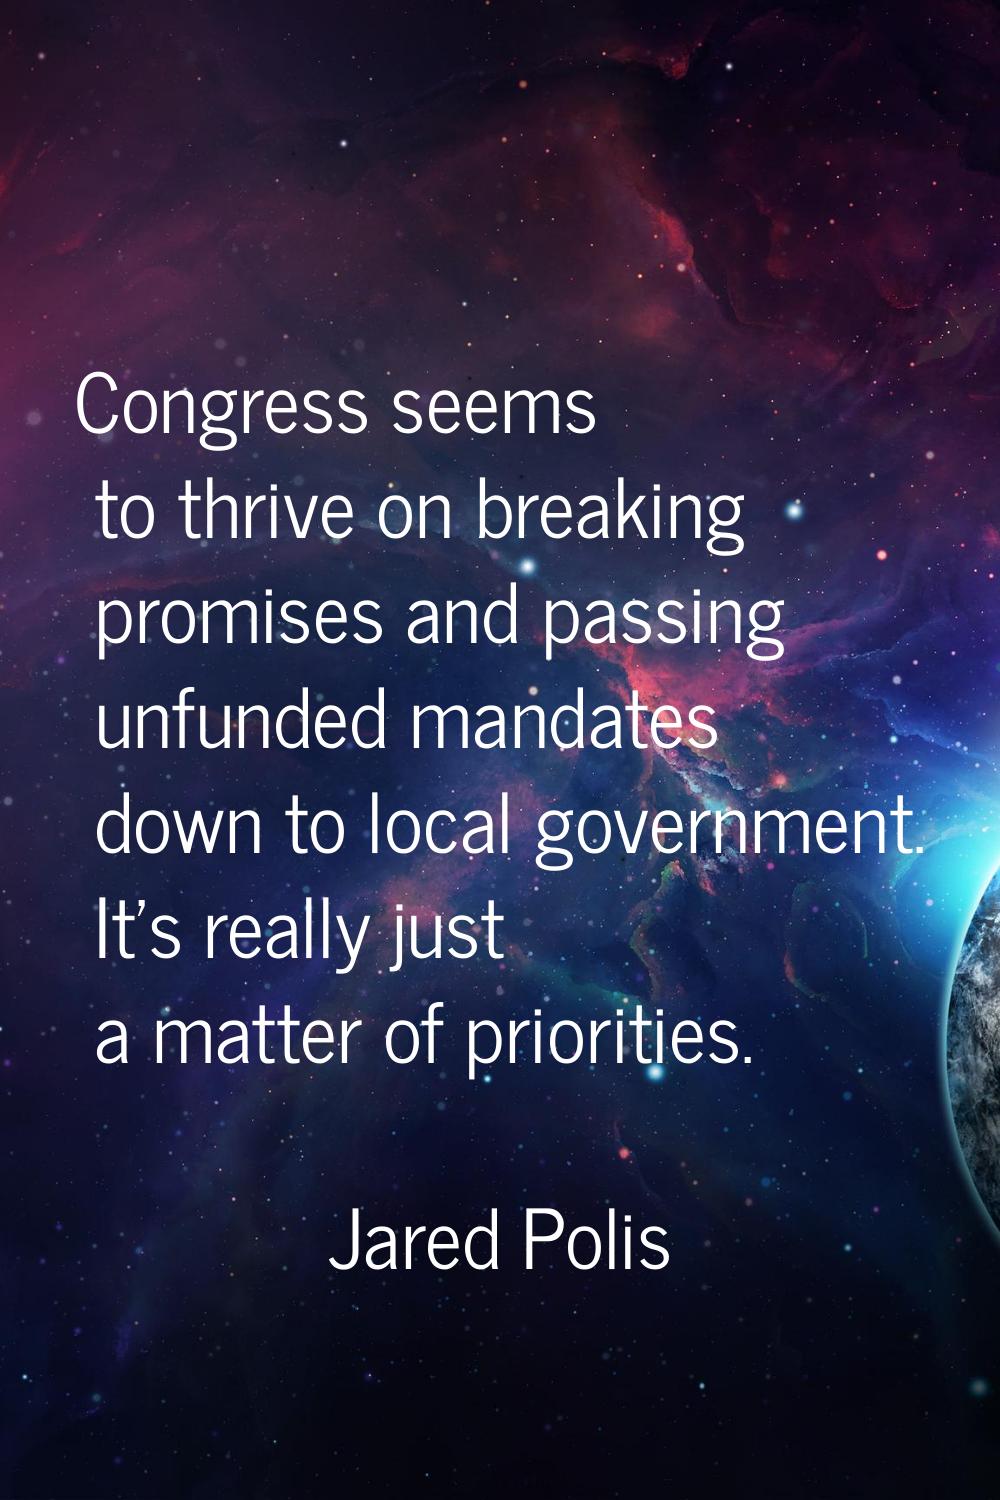 Congress seems to thrive on breaking promises and passing unfunded mandates down to local governmen